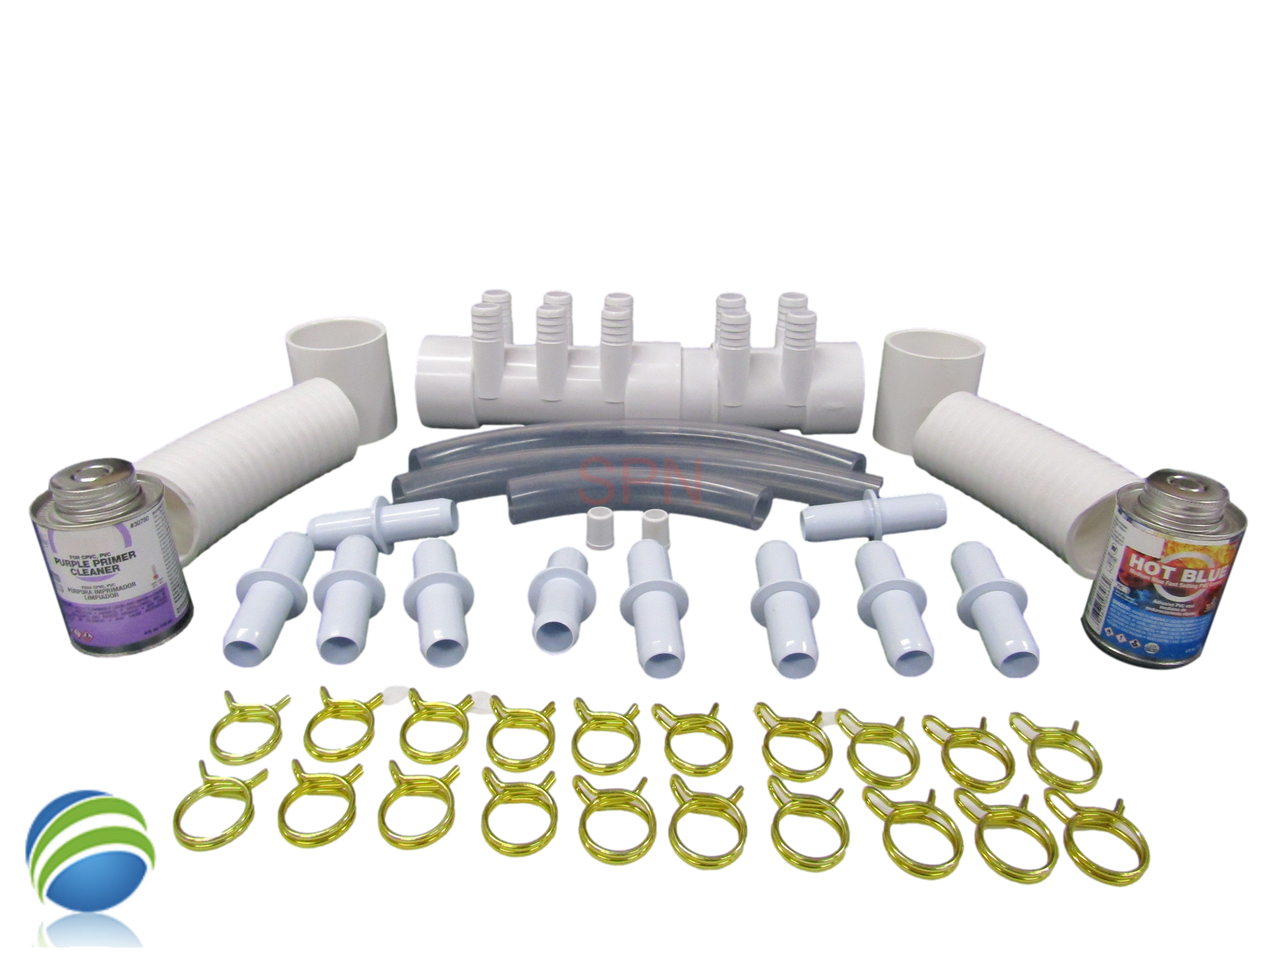 Manifold Open (10) 3/4" Outlet with Double Coupler Glue Kit Video How To